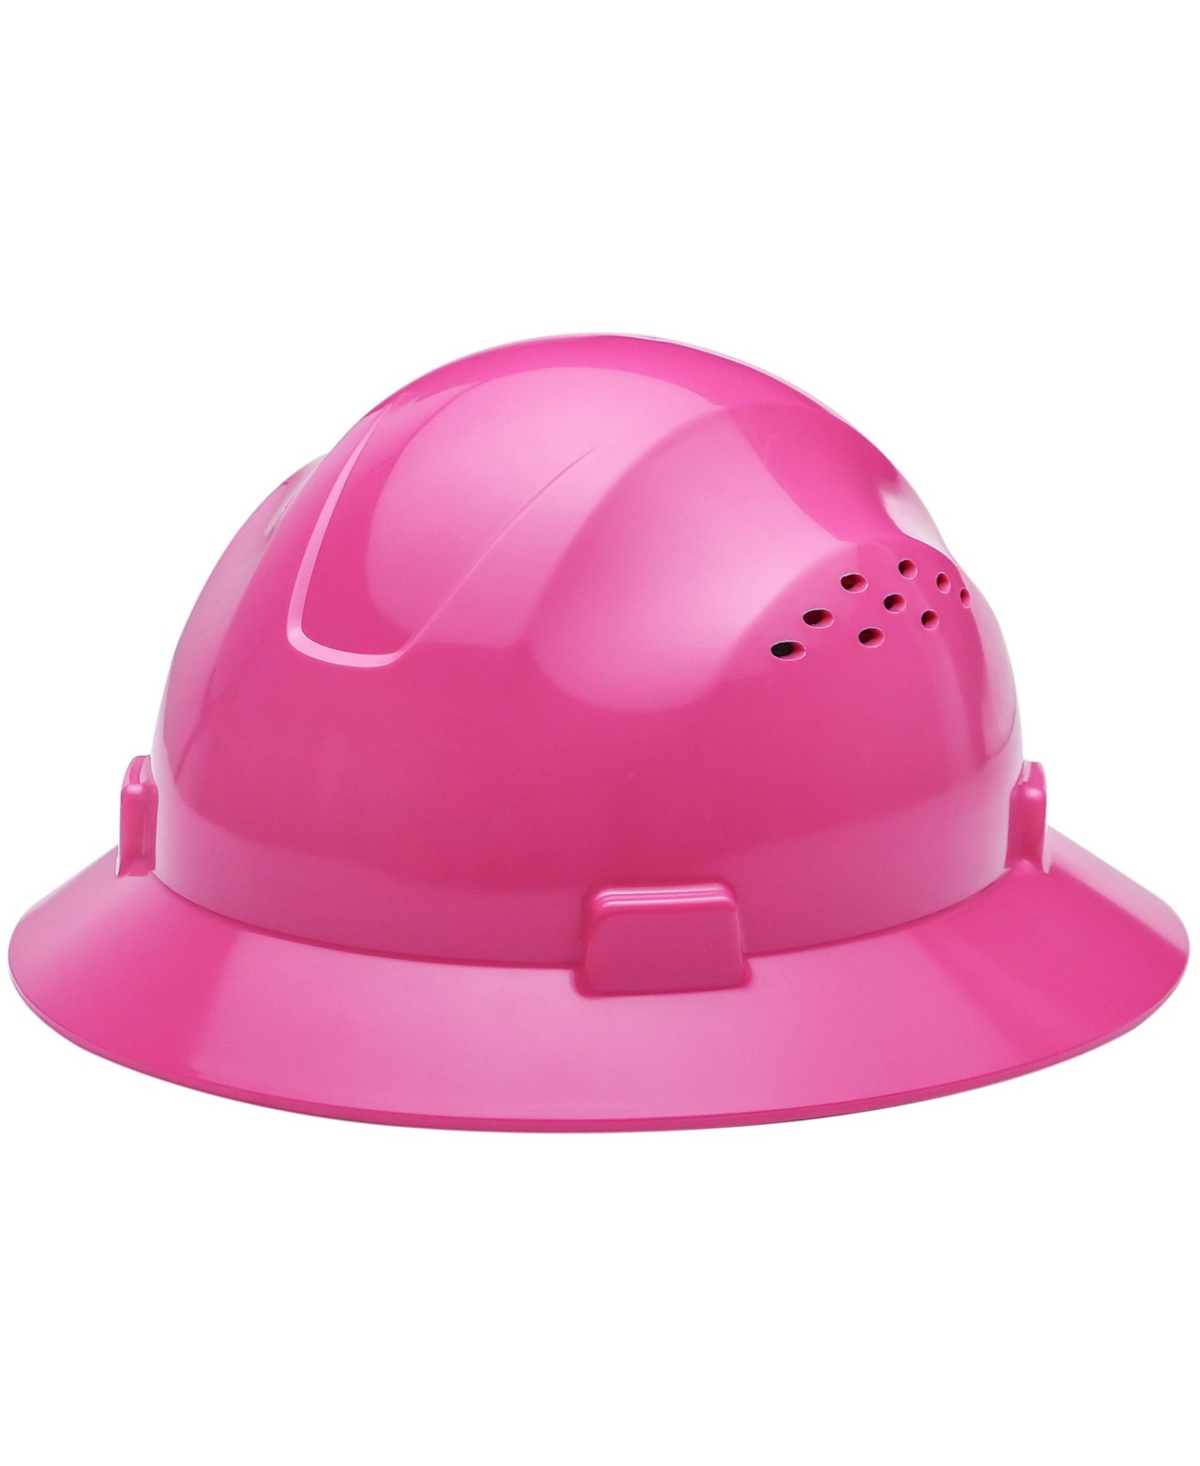 Noa Store Hdpe Pink Full Brim Hard Hat with Fas-trac Suspension - Pink